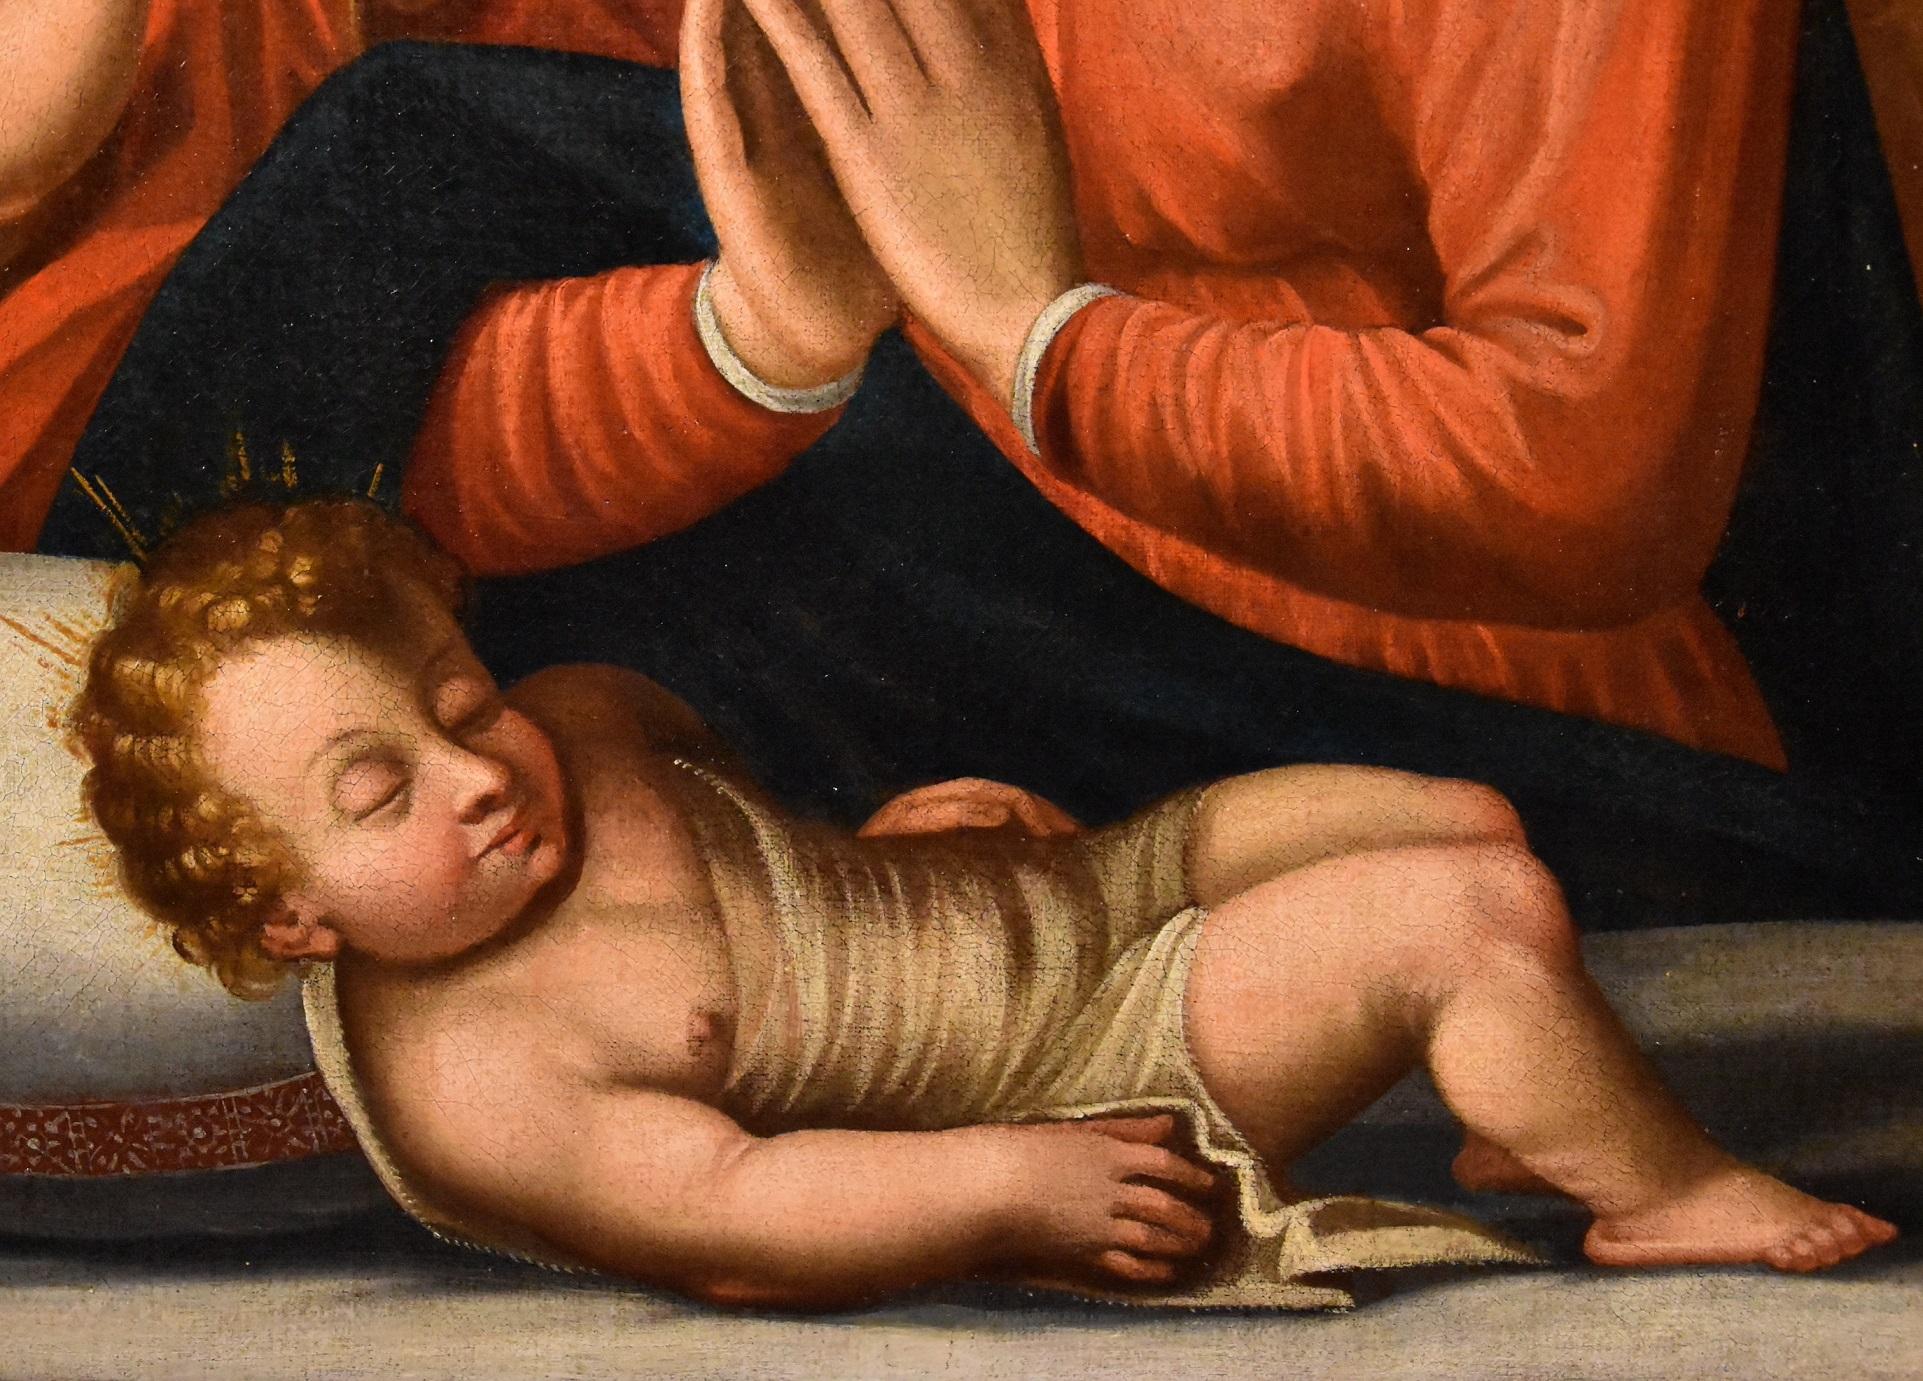 Holy Family Ramenghi Paint Oil on canvas Old master 17th Century Religious Art - Brown Portrait Painting by Giovanni Battista Ramenghi, known as Bagnacavallo (Bologna, 1521 - 1601)